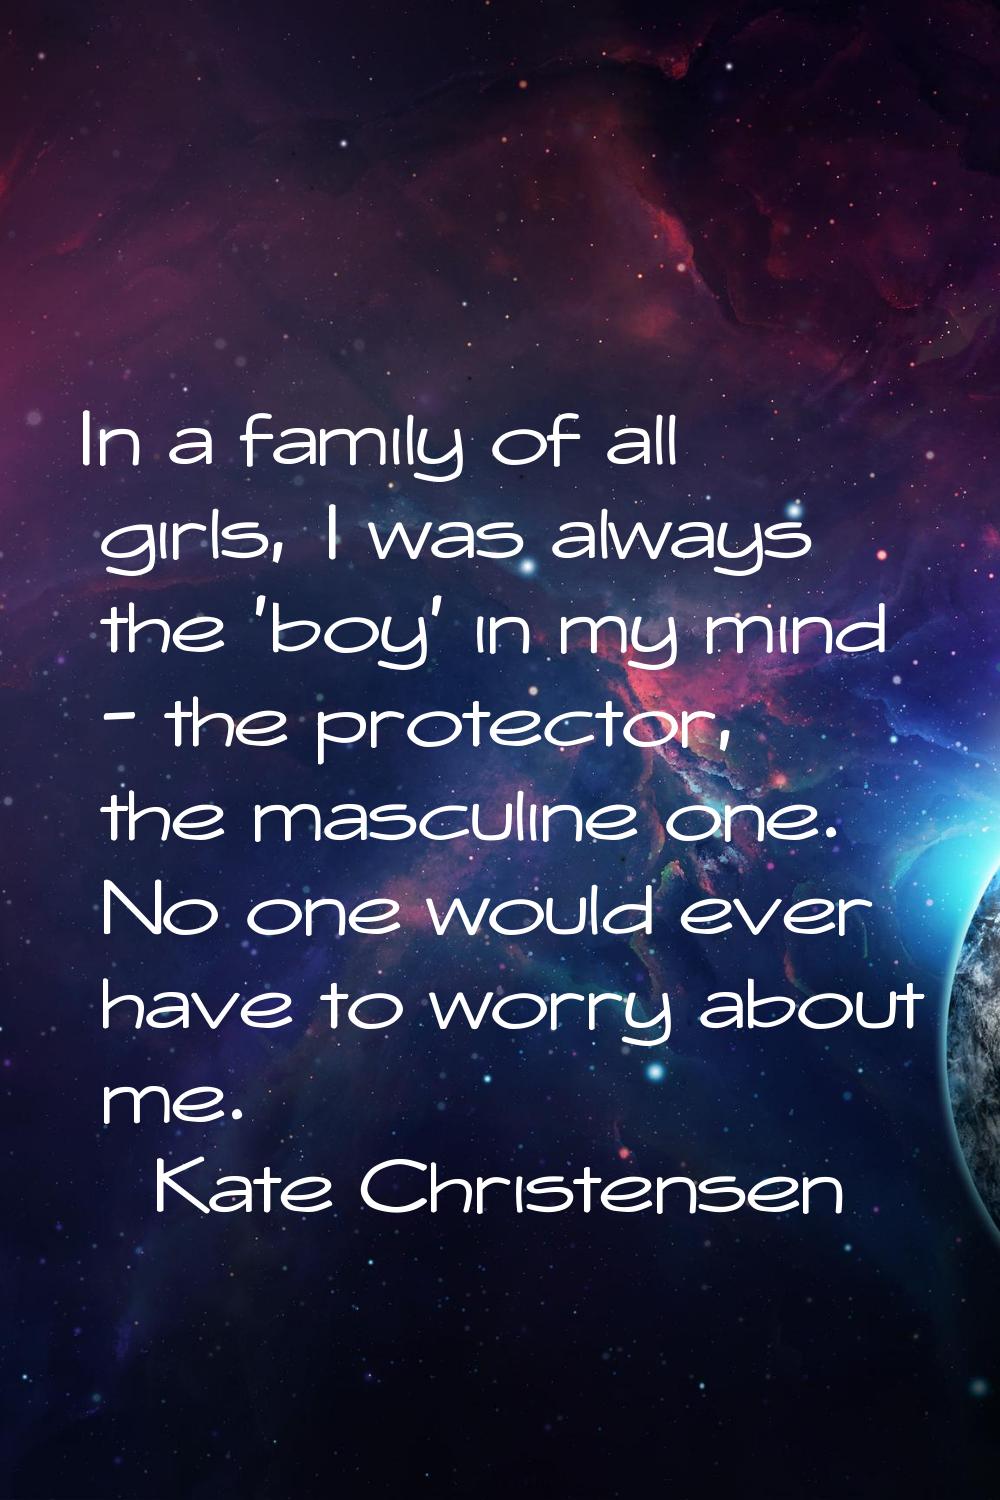 In a family of all girls, I was always the 'boy' in my mind - the protector, the masculine one. No 